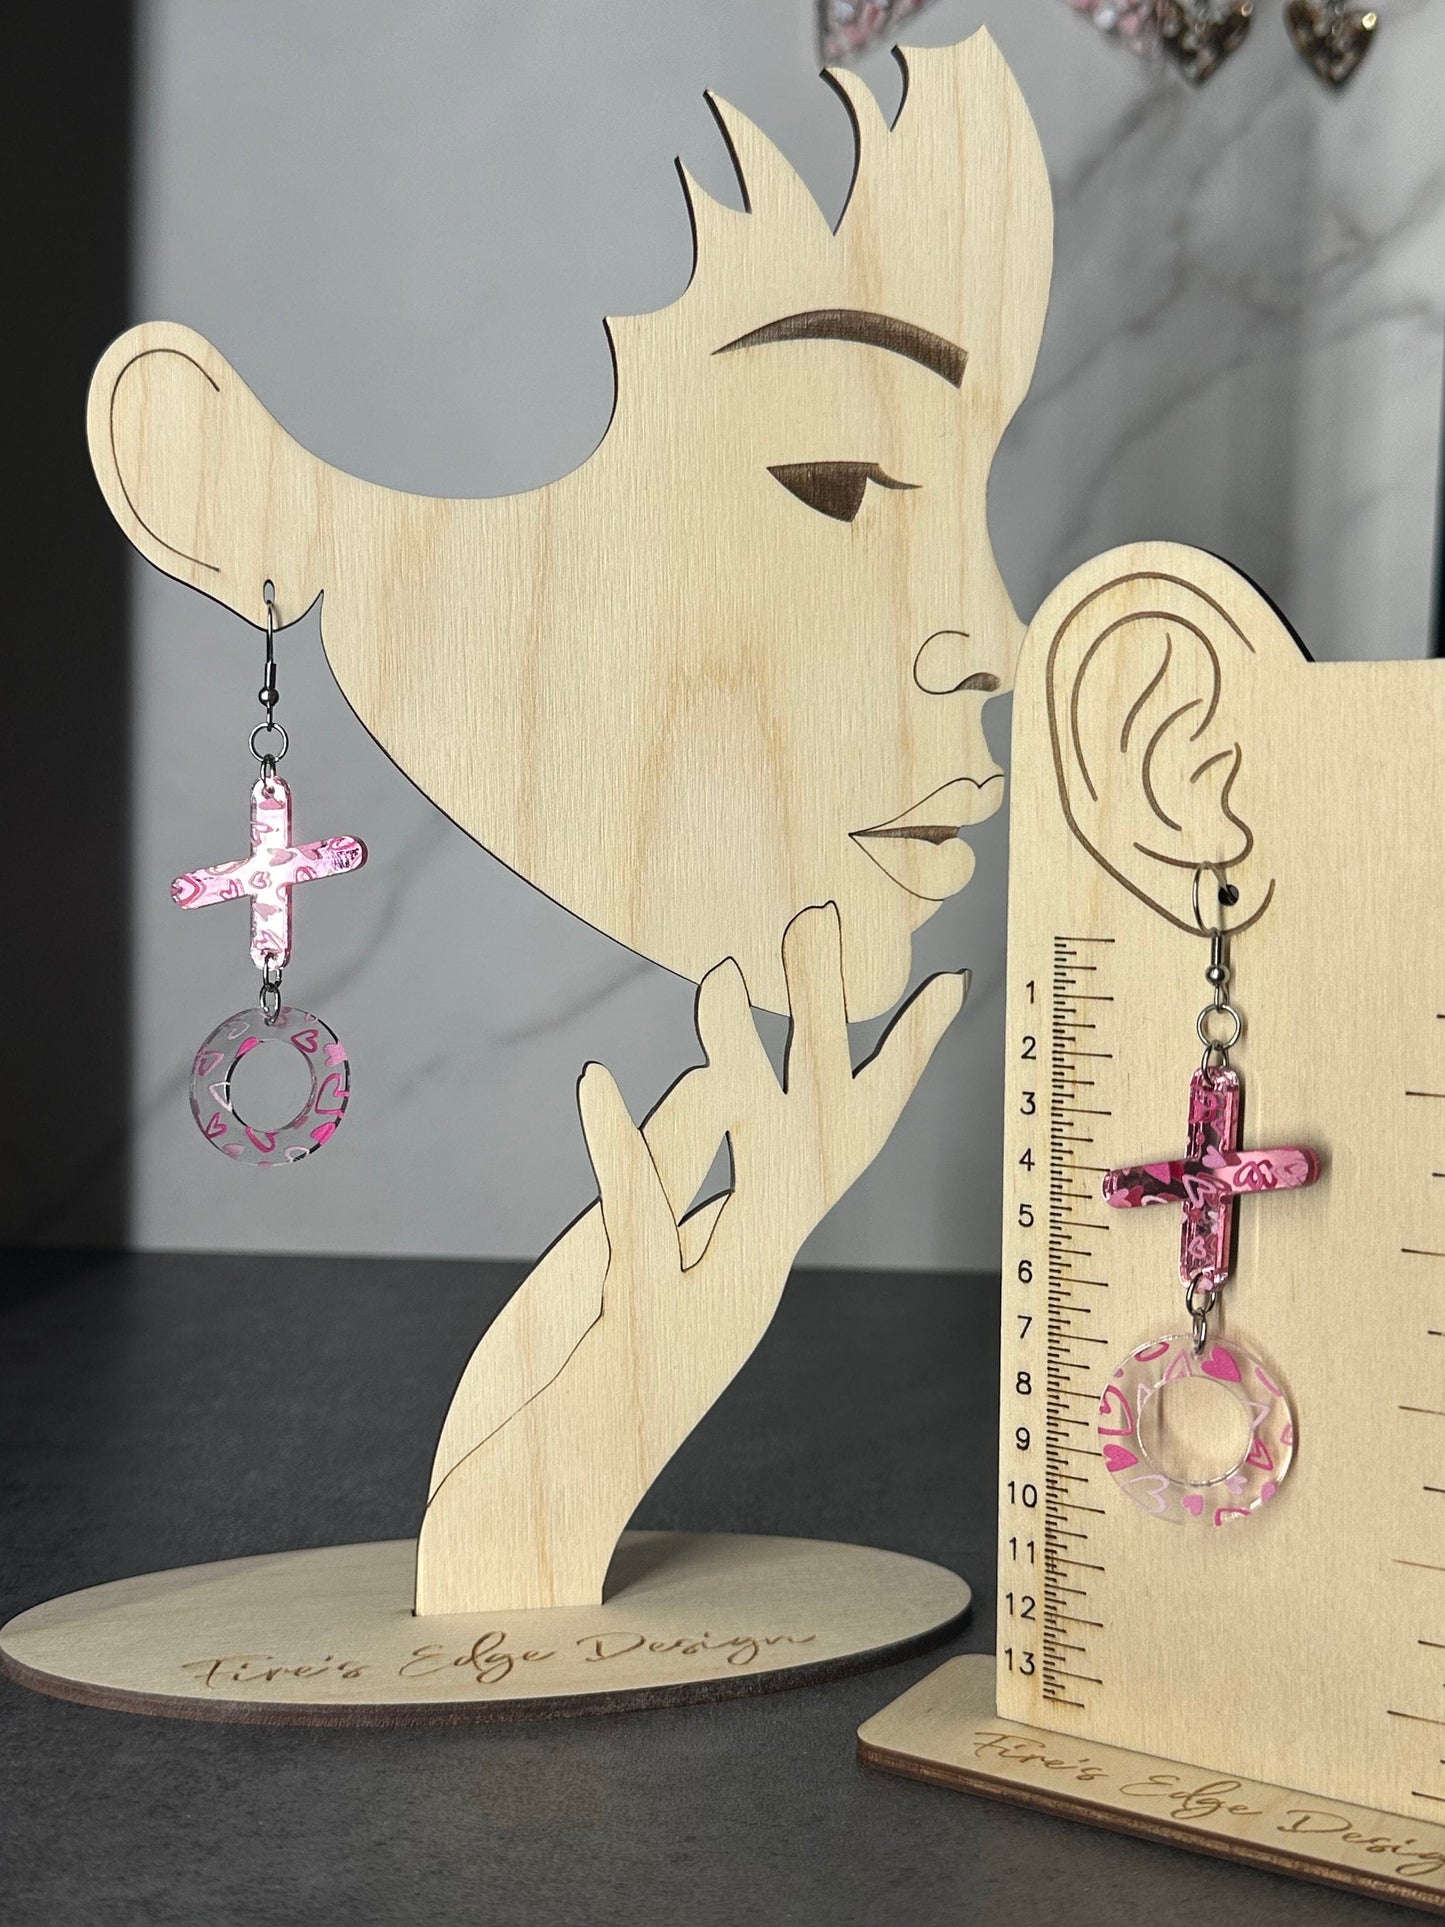 Pink XOXO Earrings, Pink Mirrored Acrylic, Lightweight Stainless Steel Hypoallergenic